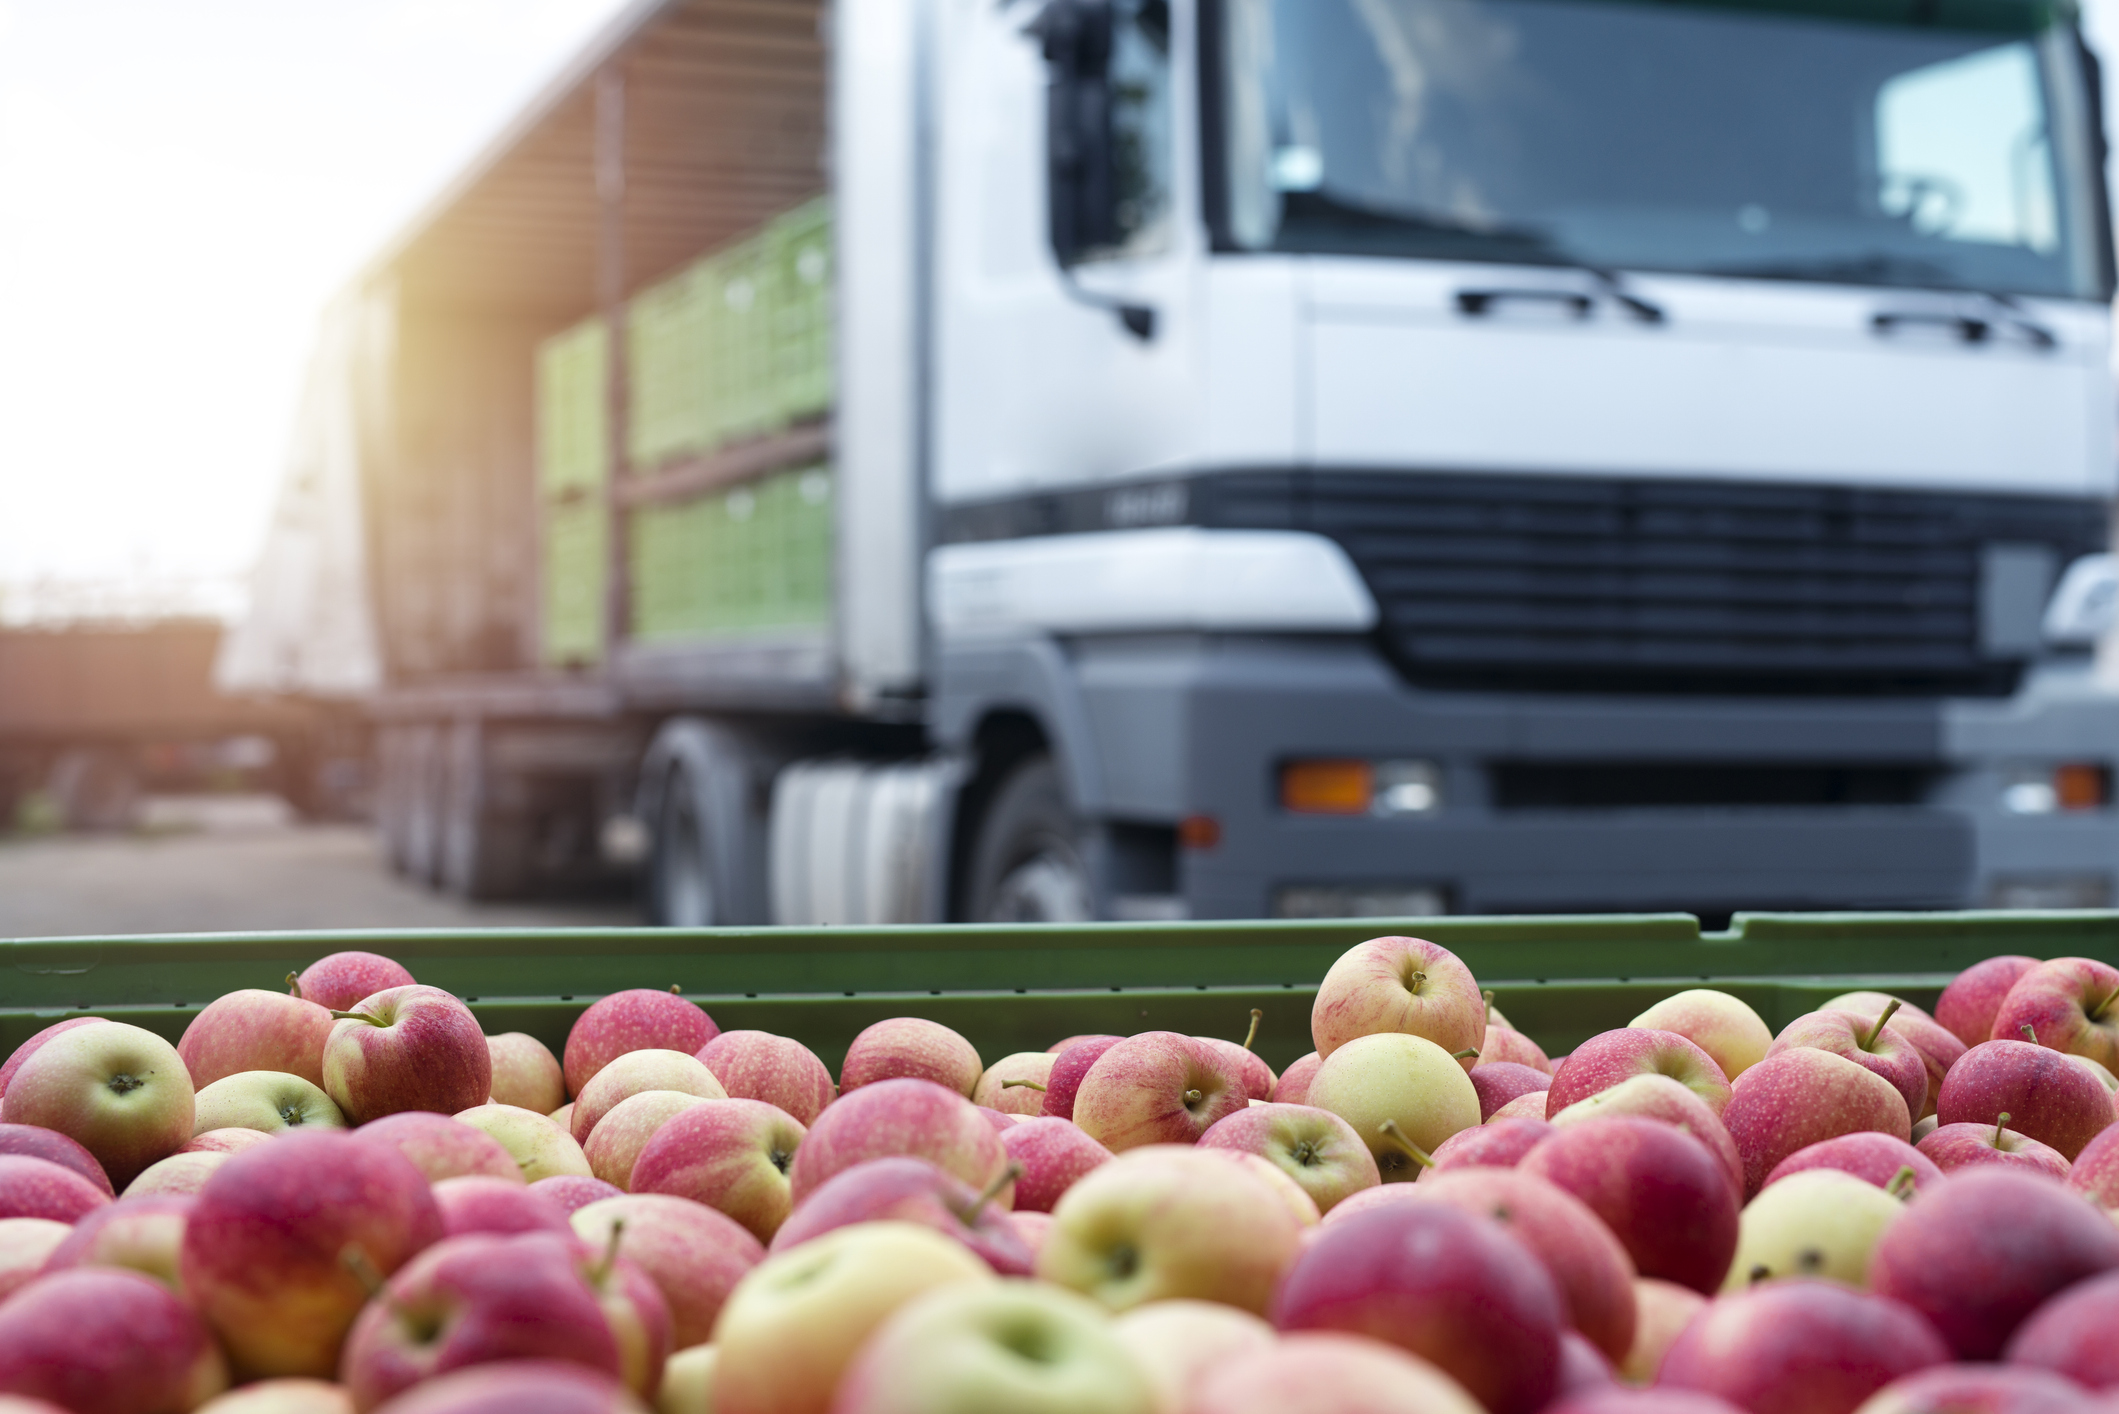 Dealing With Inflation in the Food Supply Chain